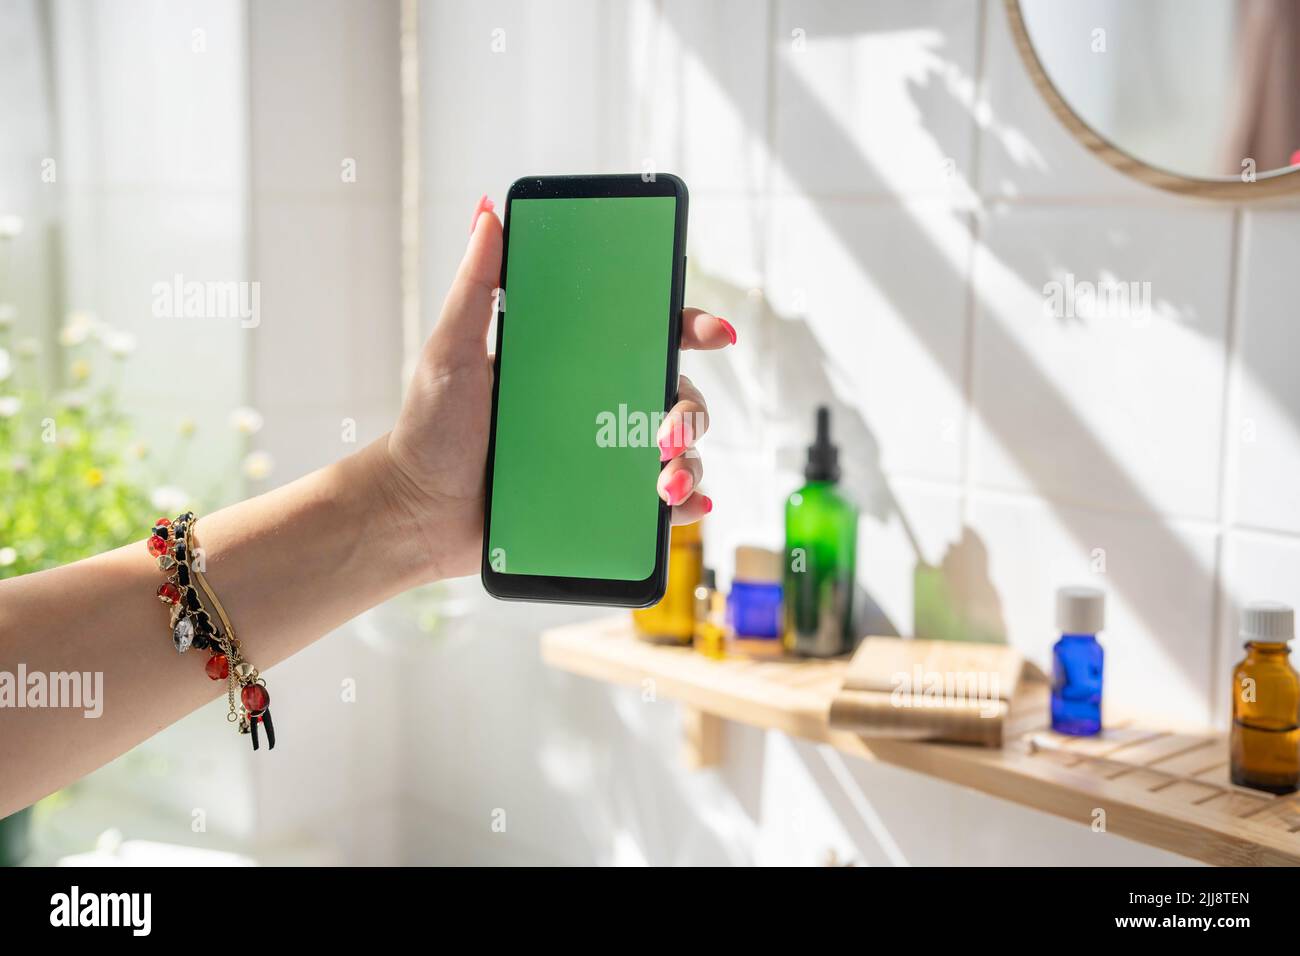 Female hand holding smartphone with green screen in bathroom against bamboo shelf with glass cosmetic bottles. Shadows from the sun on the white tiled wall Stock Photo